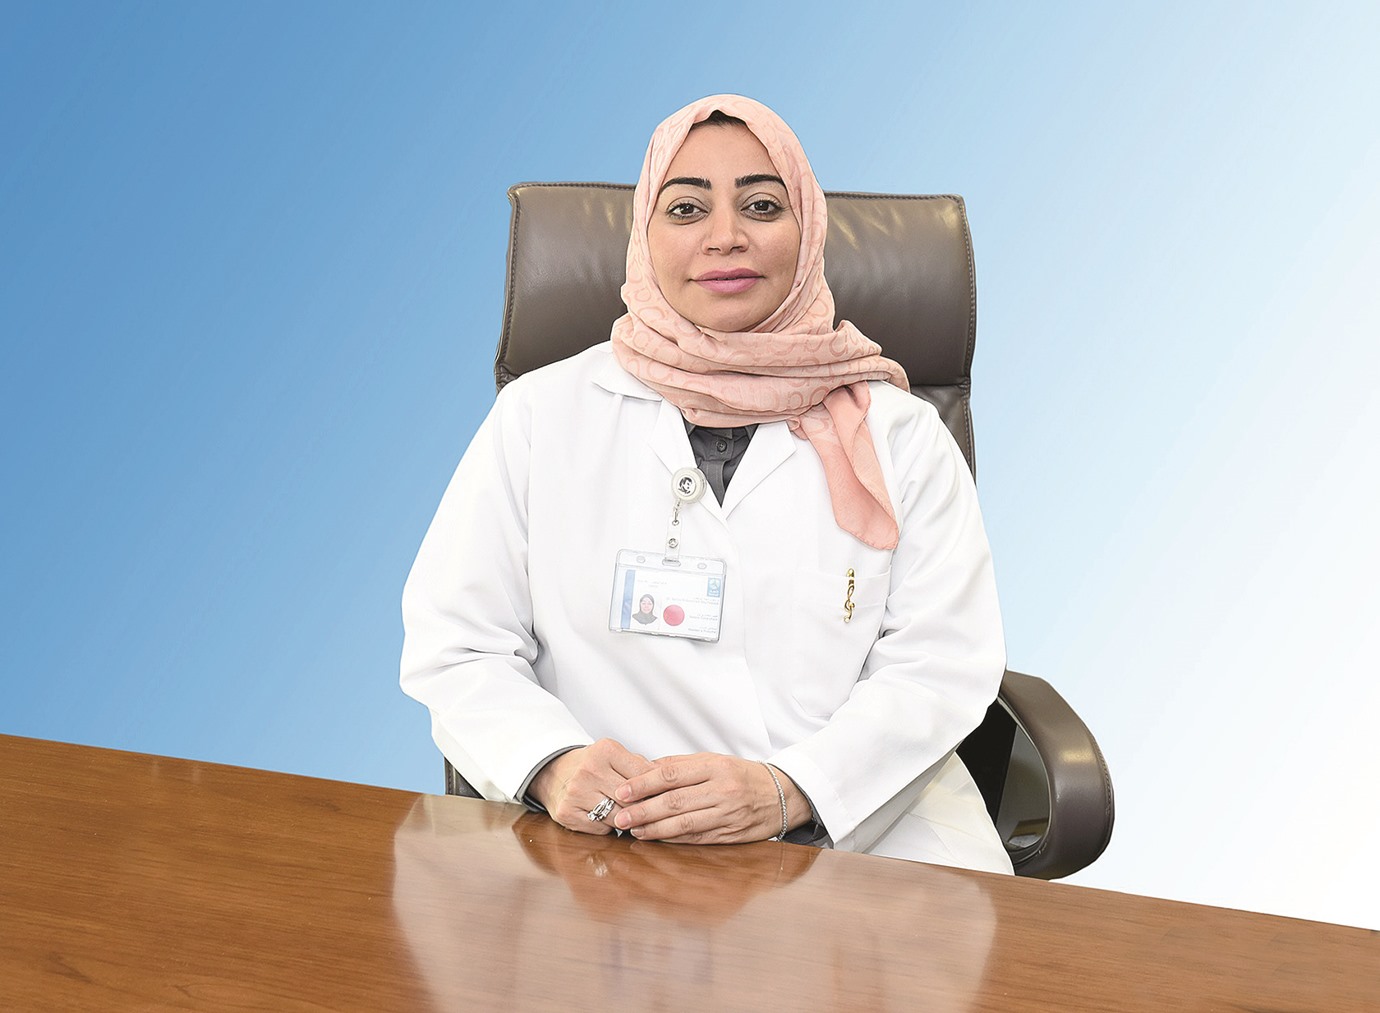 Arab Board Exam for Obstetrics and Gynecology held in Qatar for first time